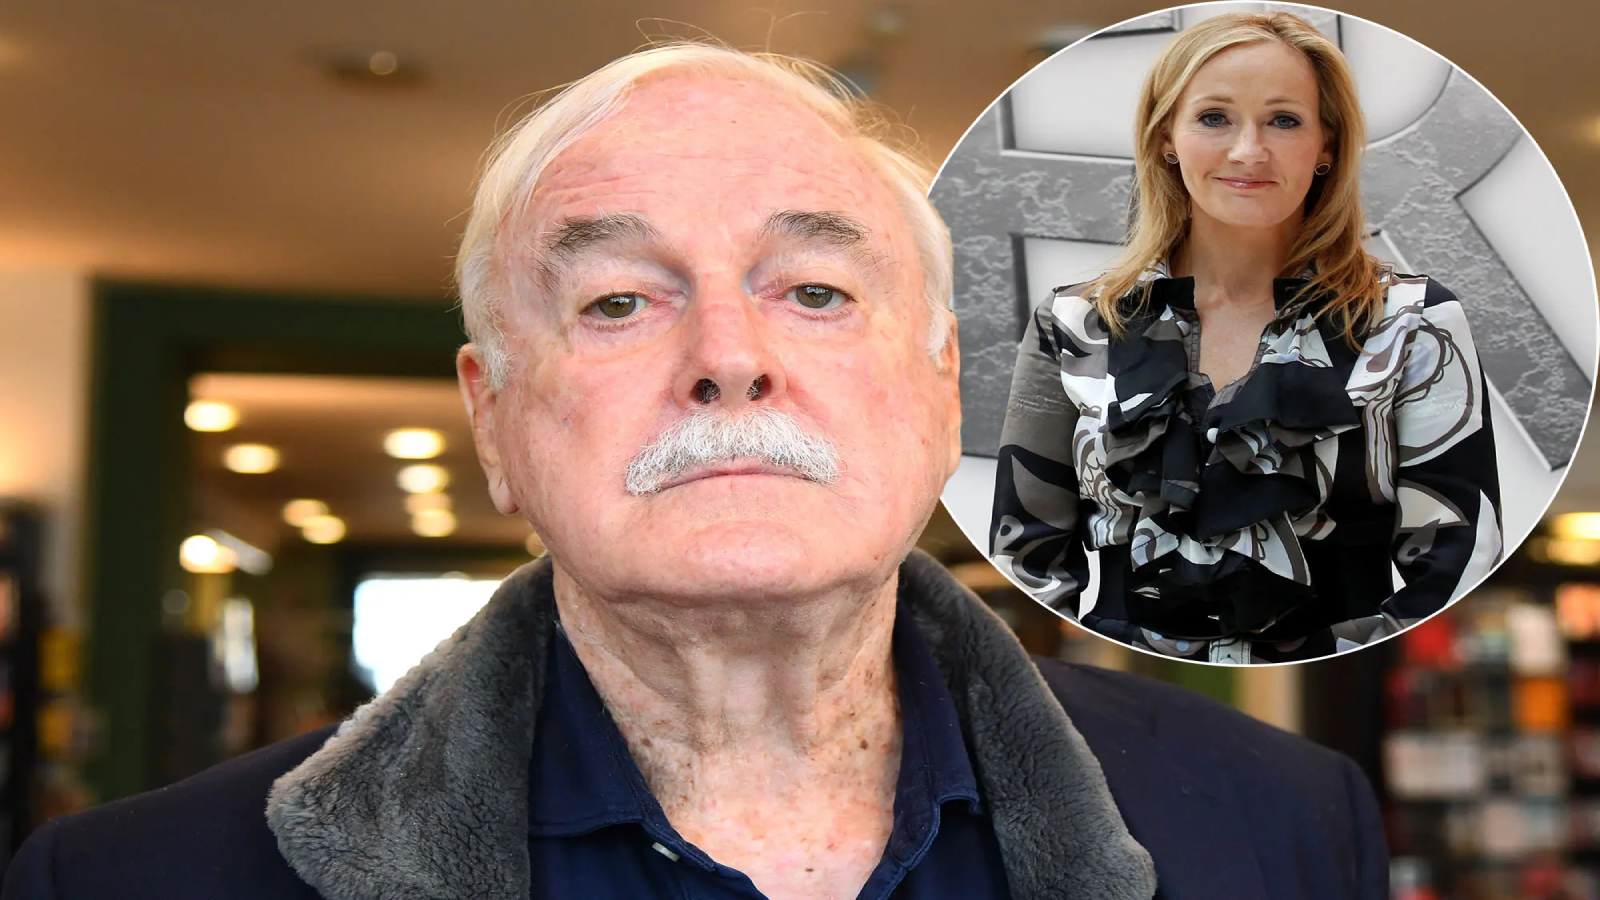 JK Rowling: John Cleese, star of Monty Python, the defender: "Does hate only go one way?"